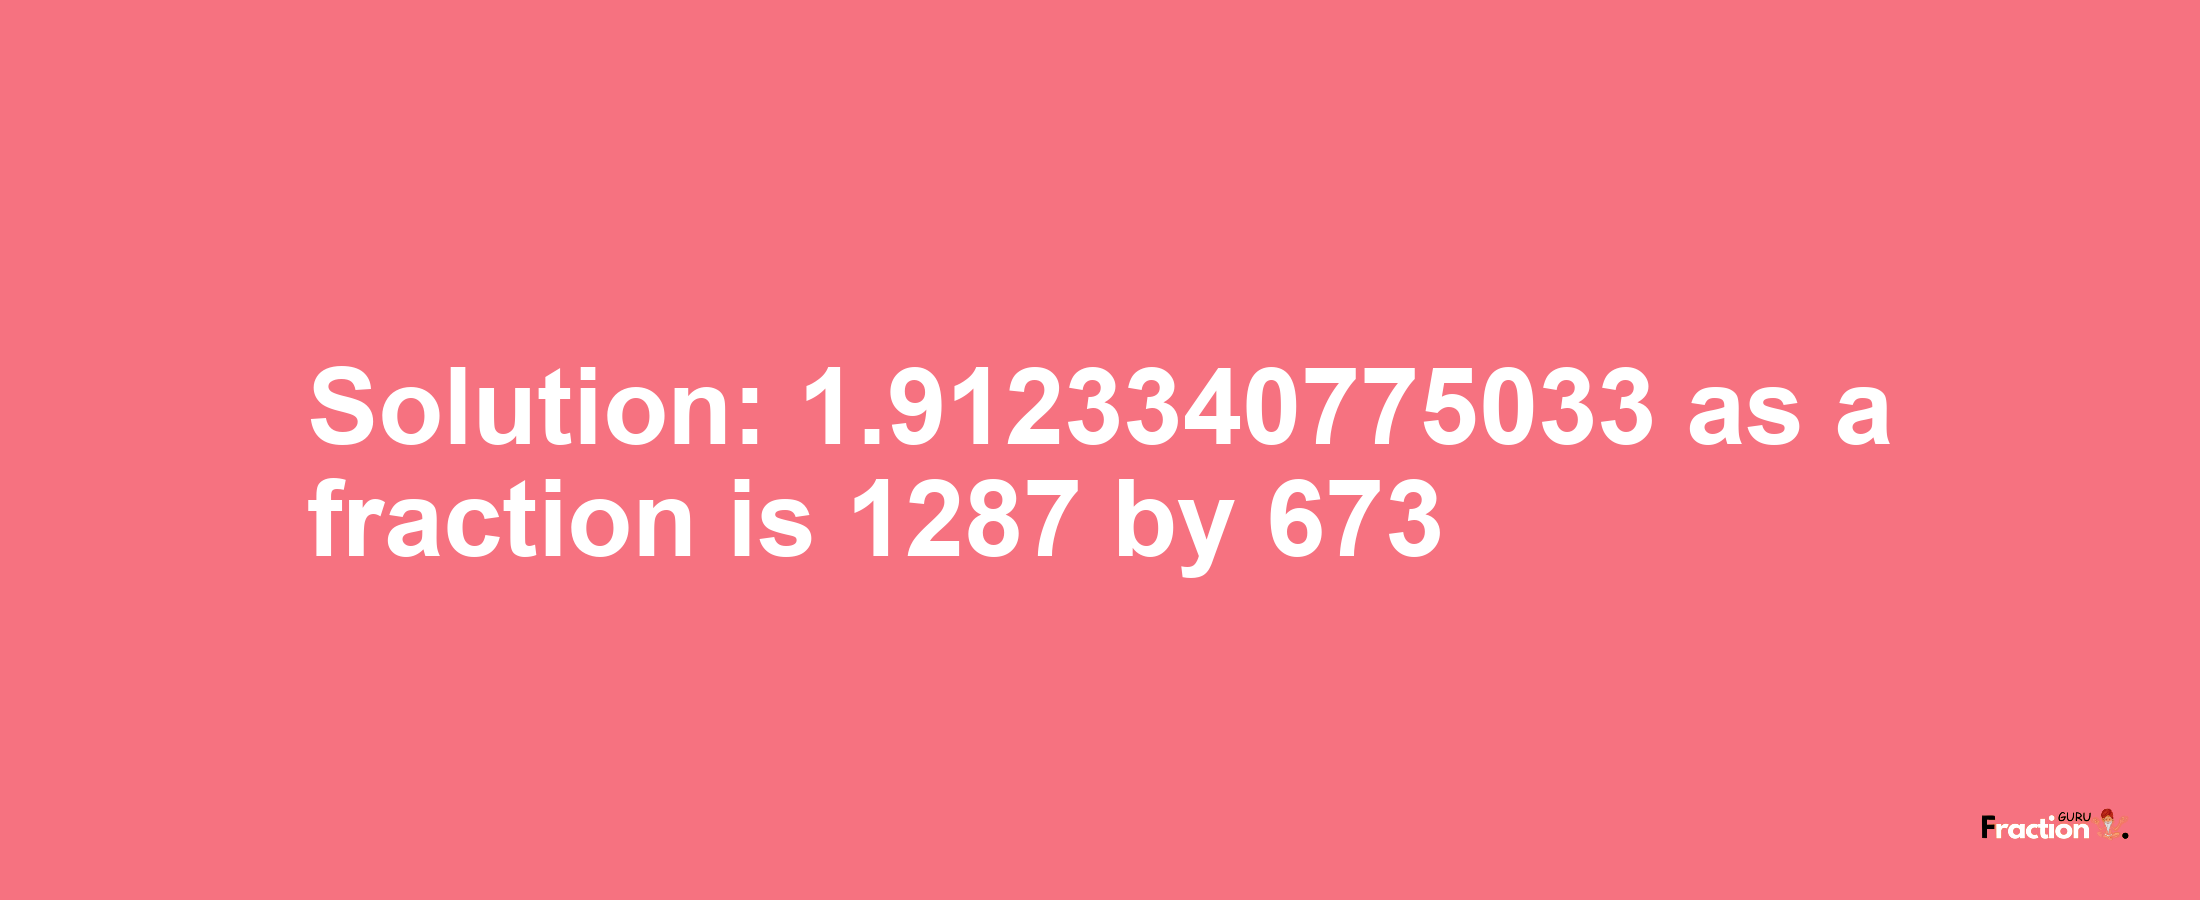 Solution:1.9123340775033 as a fraction is 1287/673